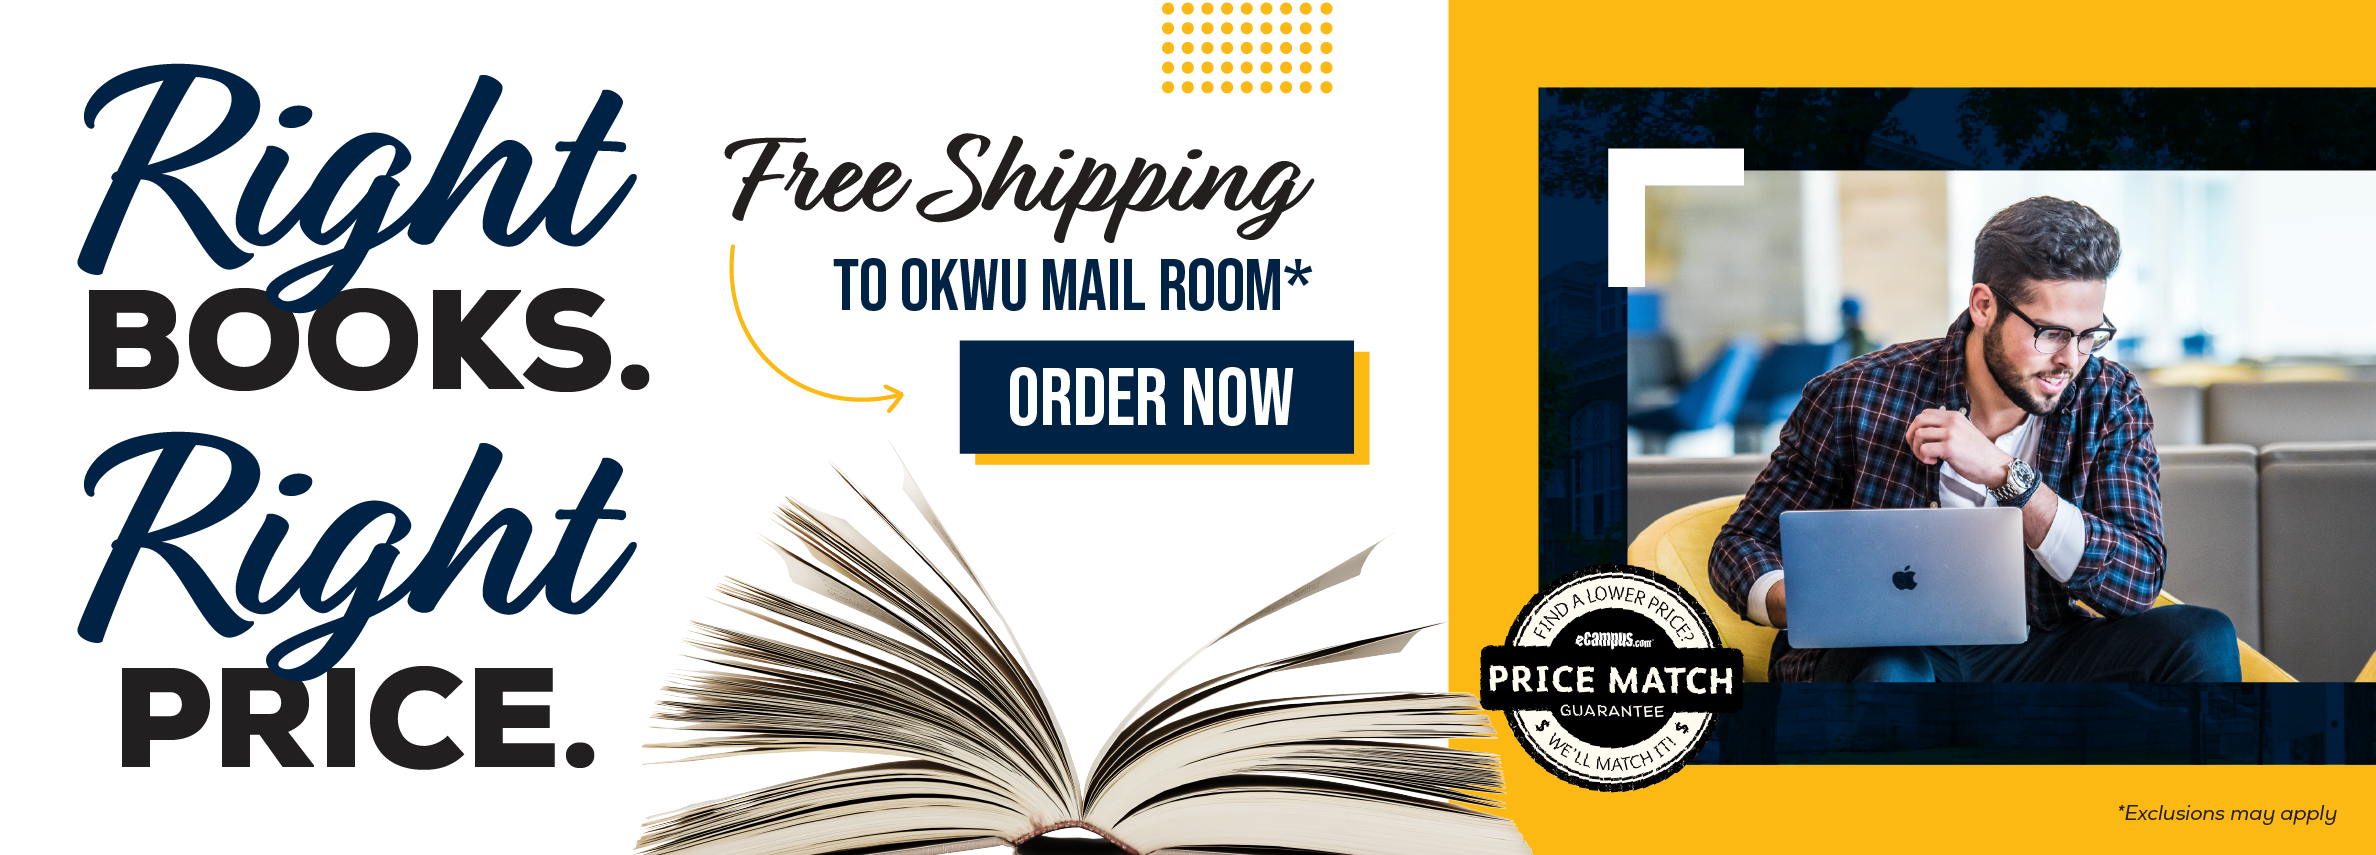 Right books. Right price. Free shipping to OKWU Mail Room.* Order now. Price Match Guarantee. *Exclusions may apply.